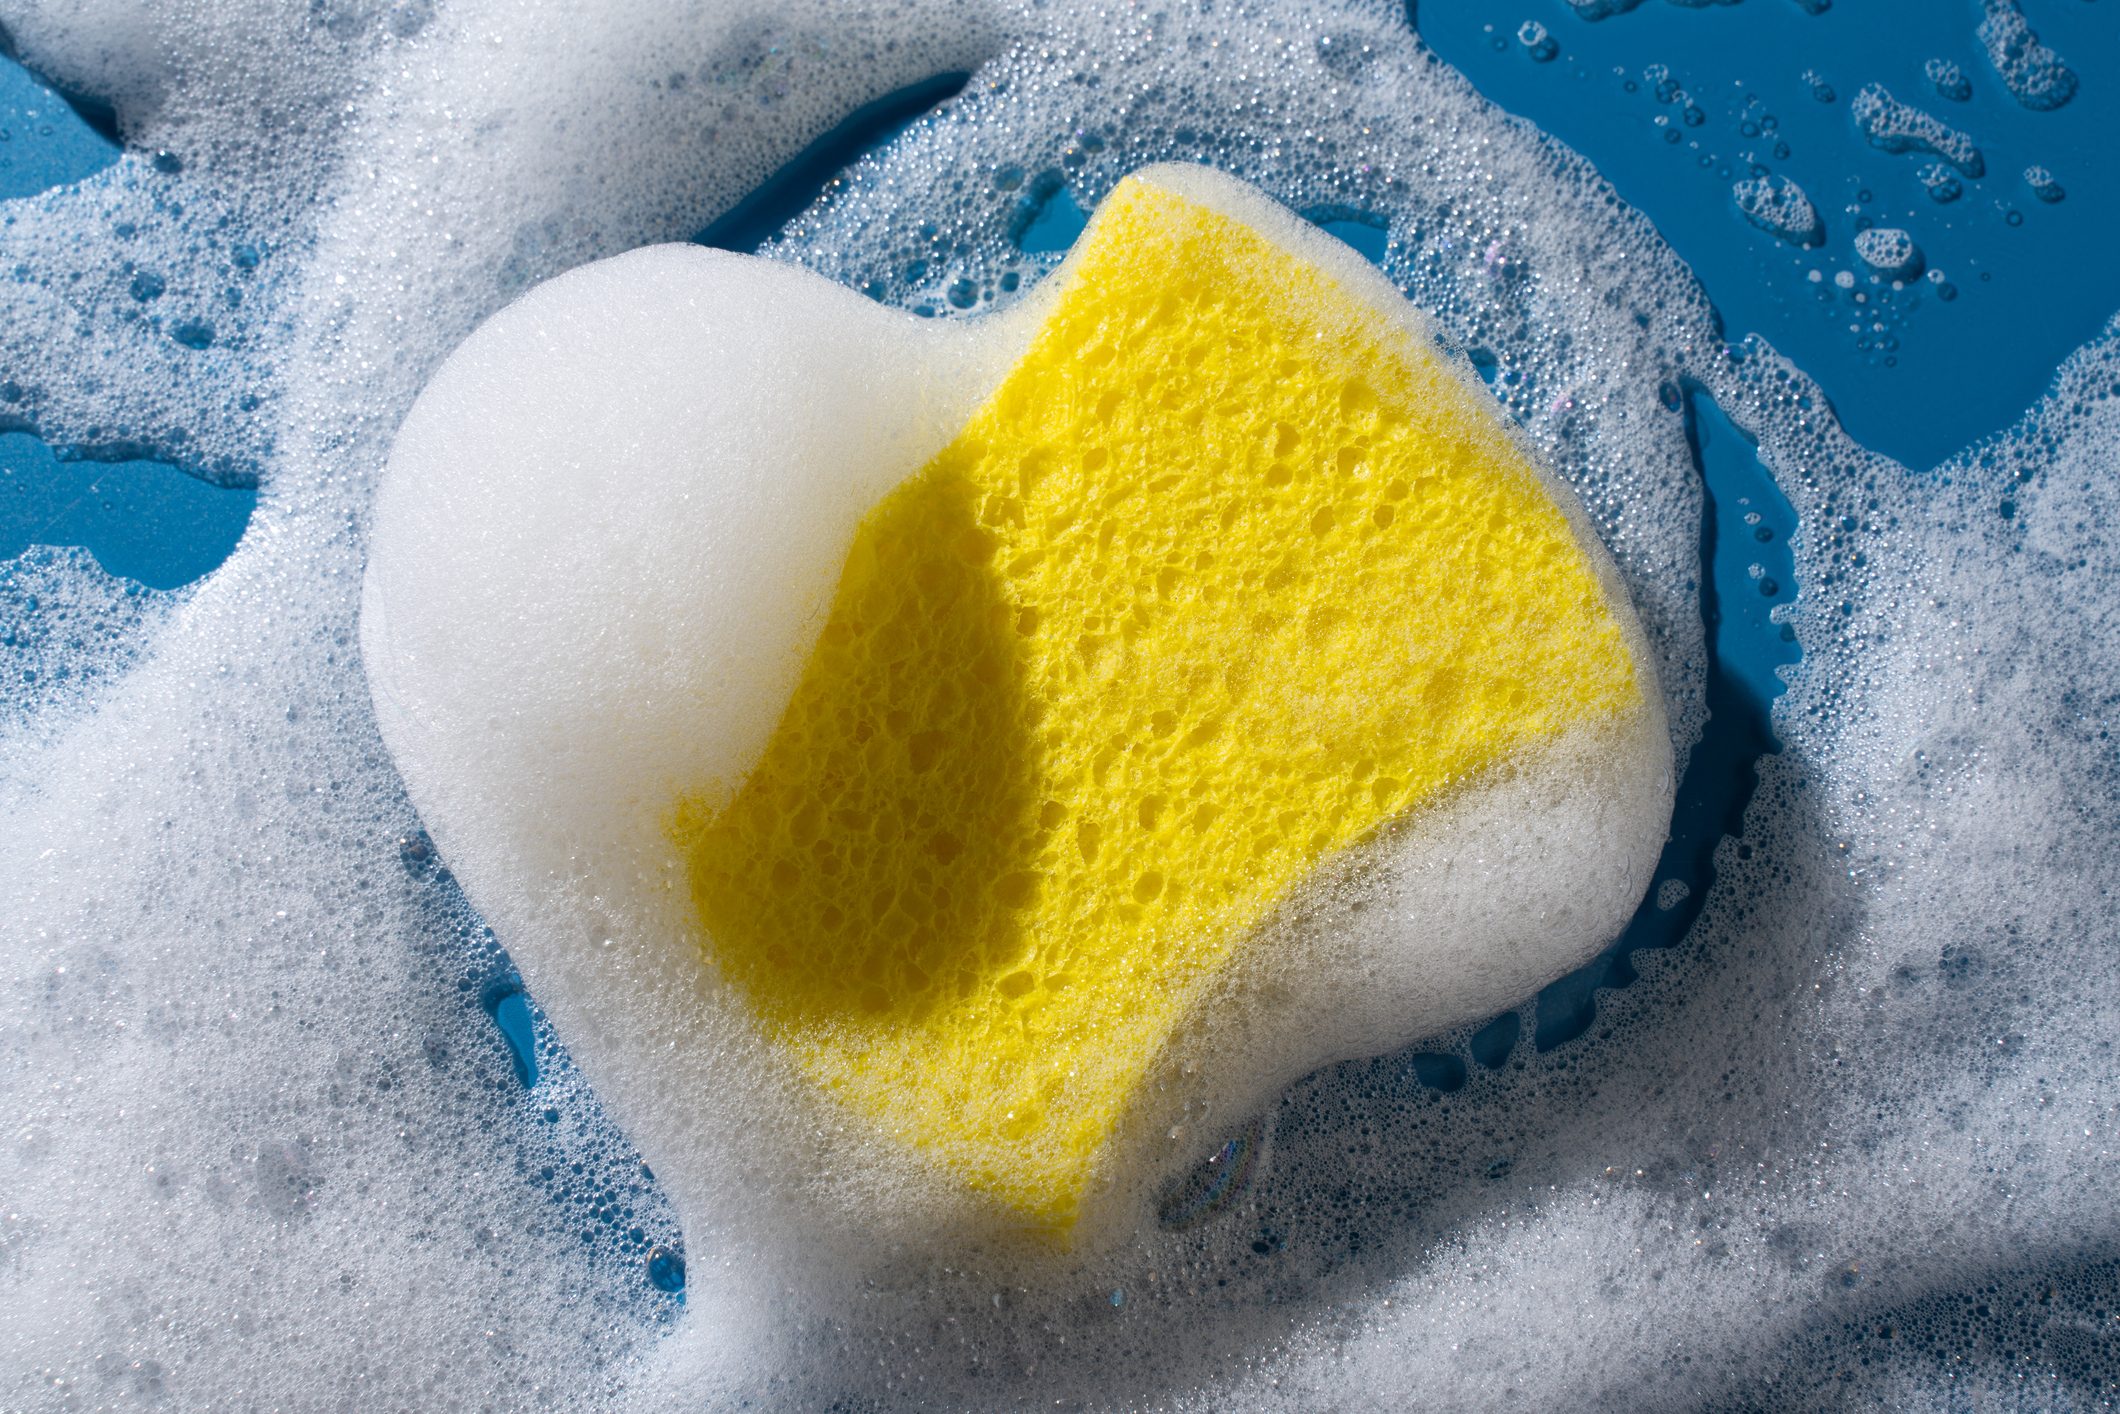 How to Clean and Disinfect a Kitchen Sponge